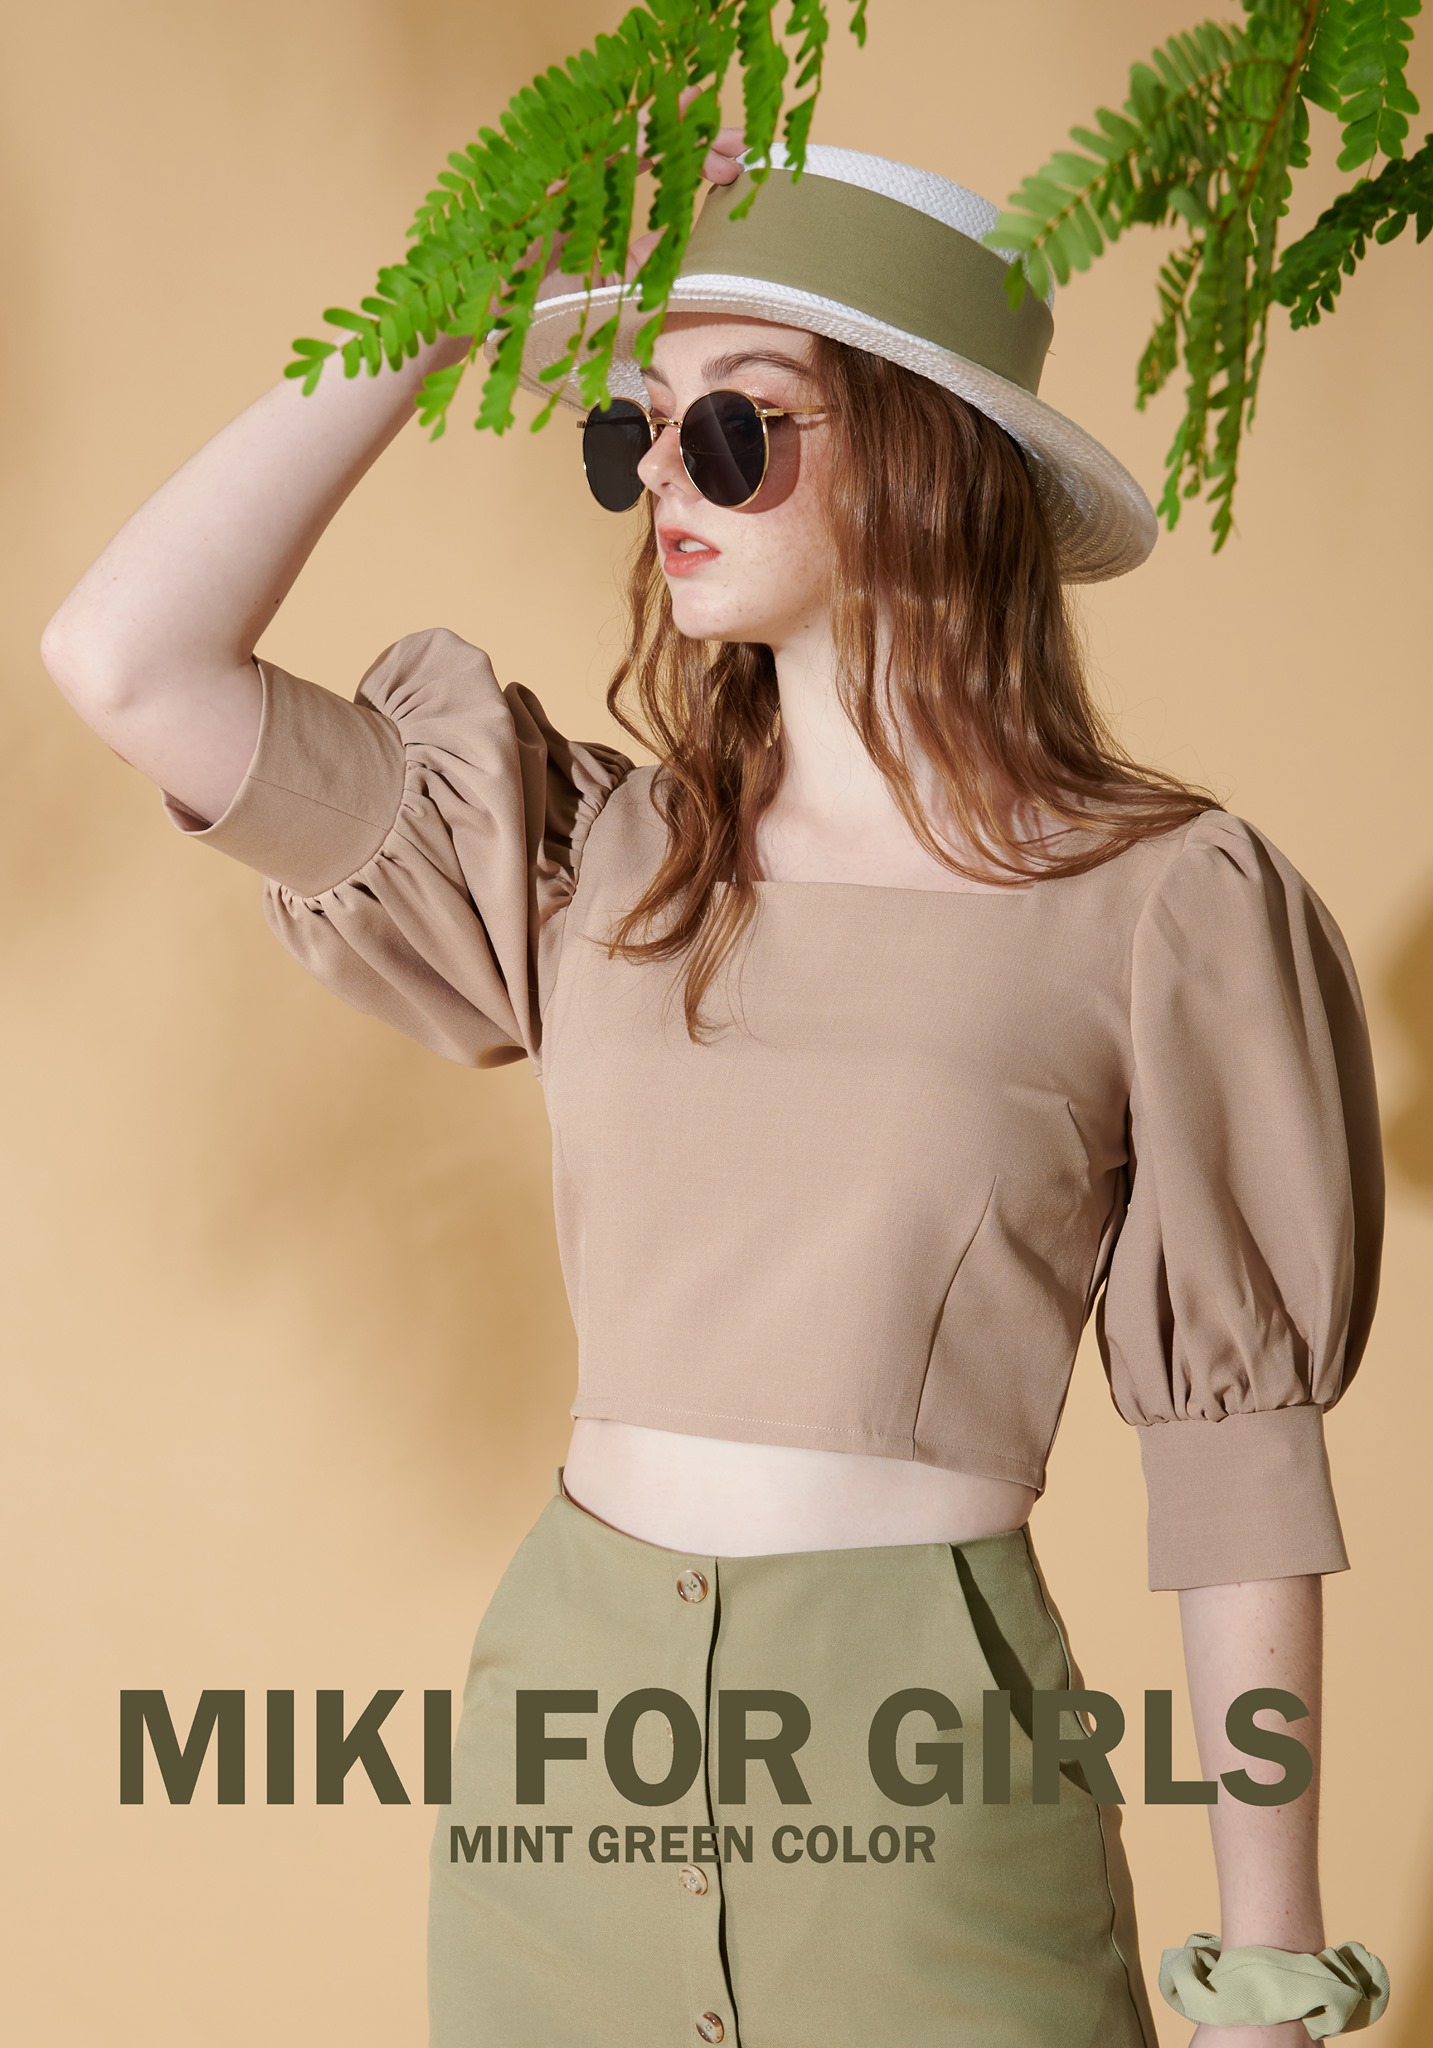 MIKI FOR GIRLS – MINT GREEN COLOR